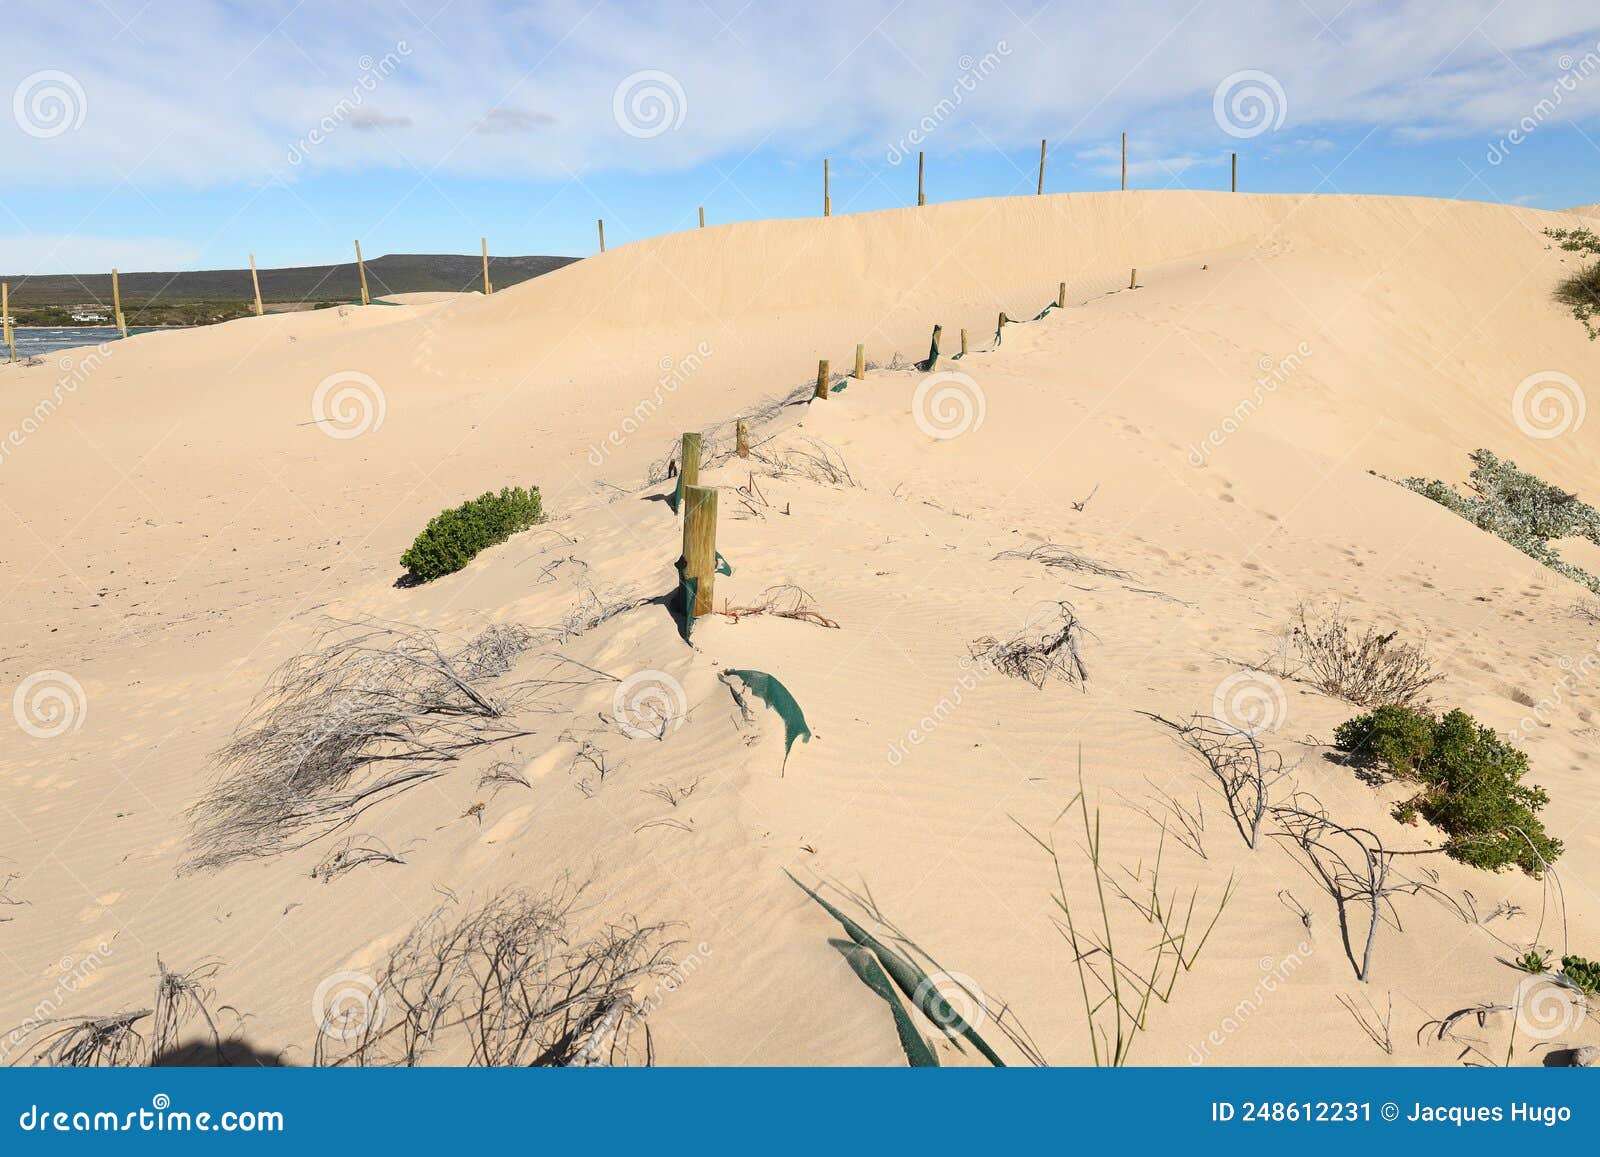 poles with netting in dunes, used to stabilize the sand of the dunes at witsand, south africa